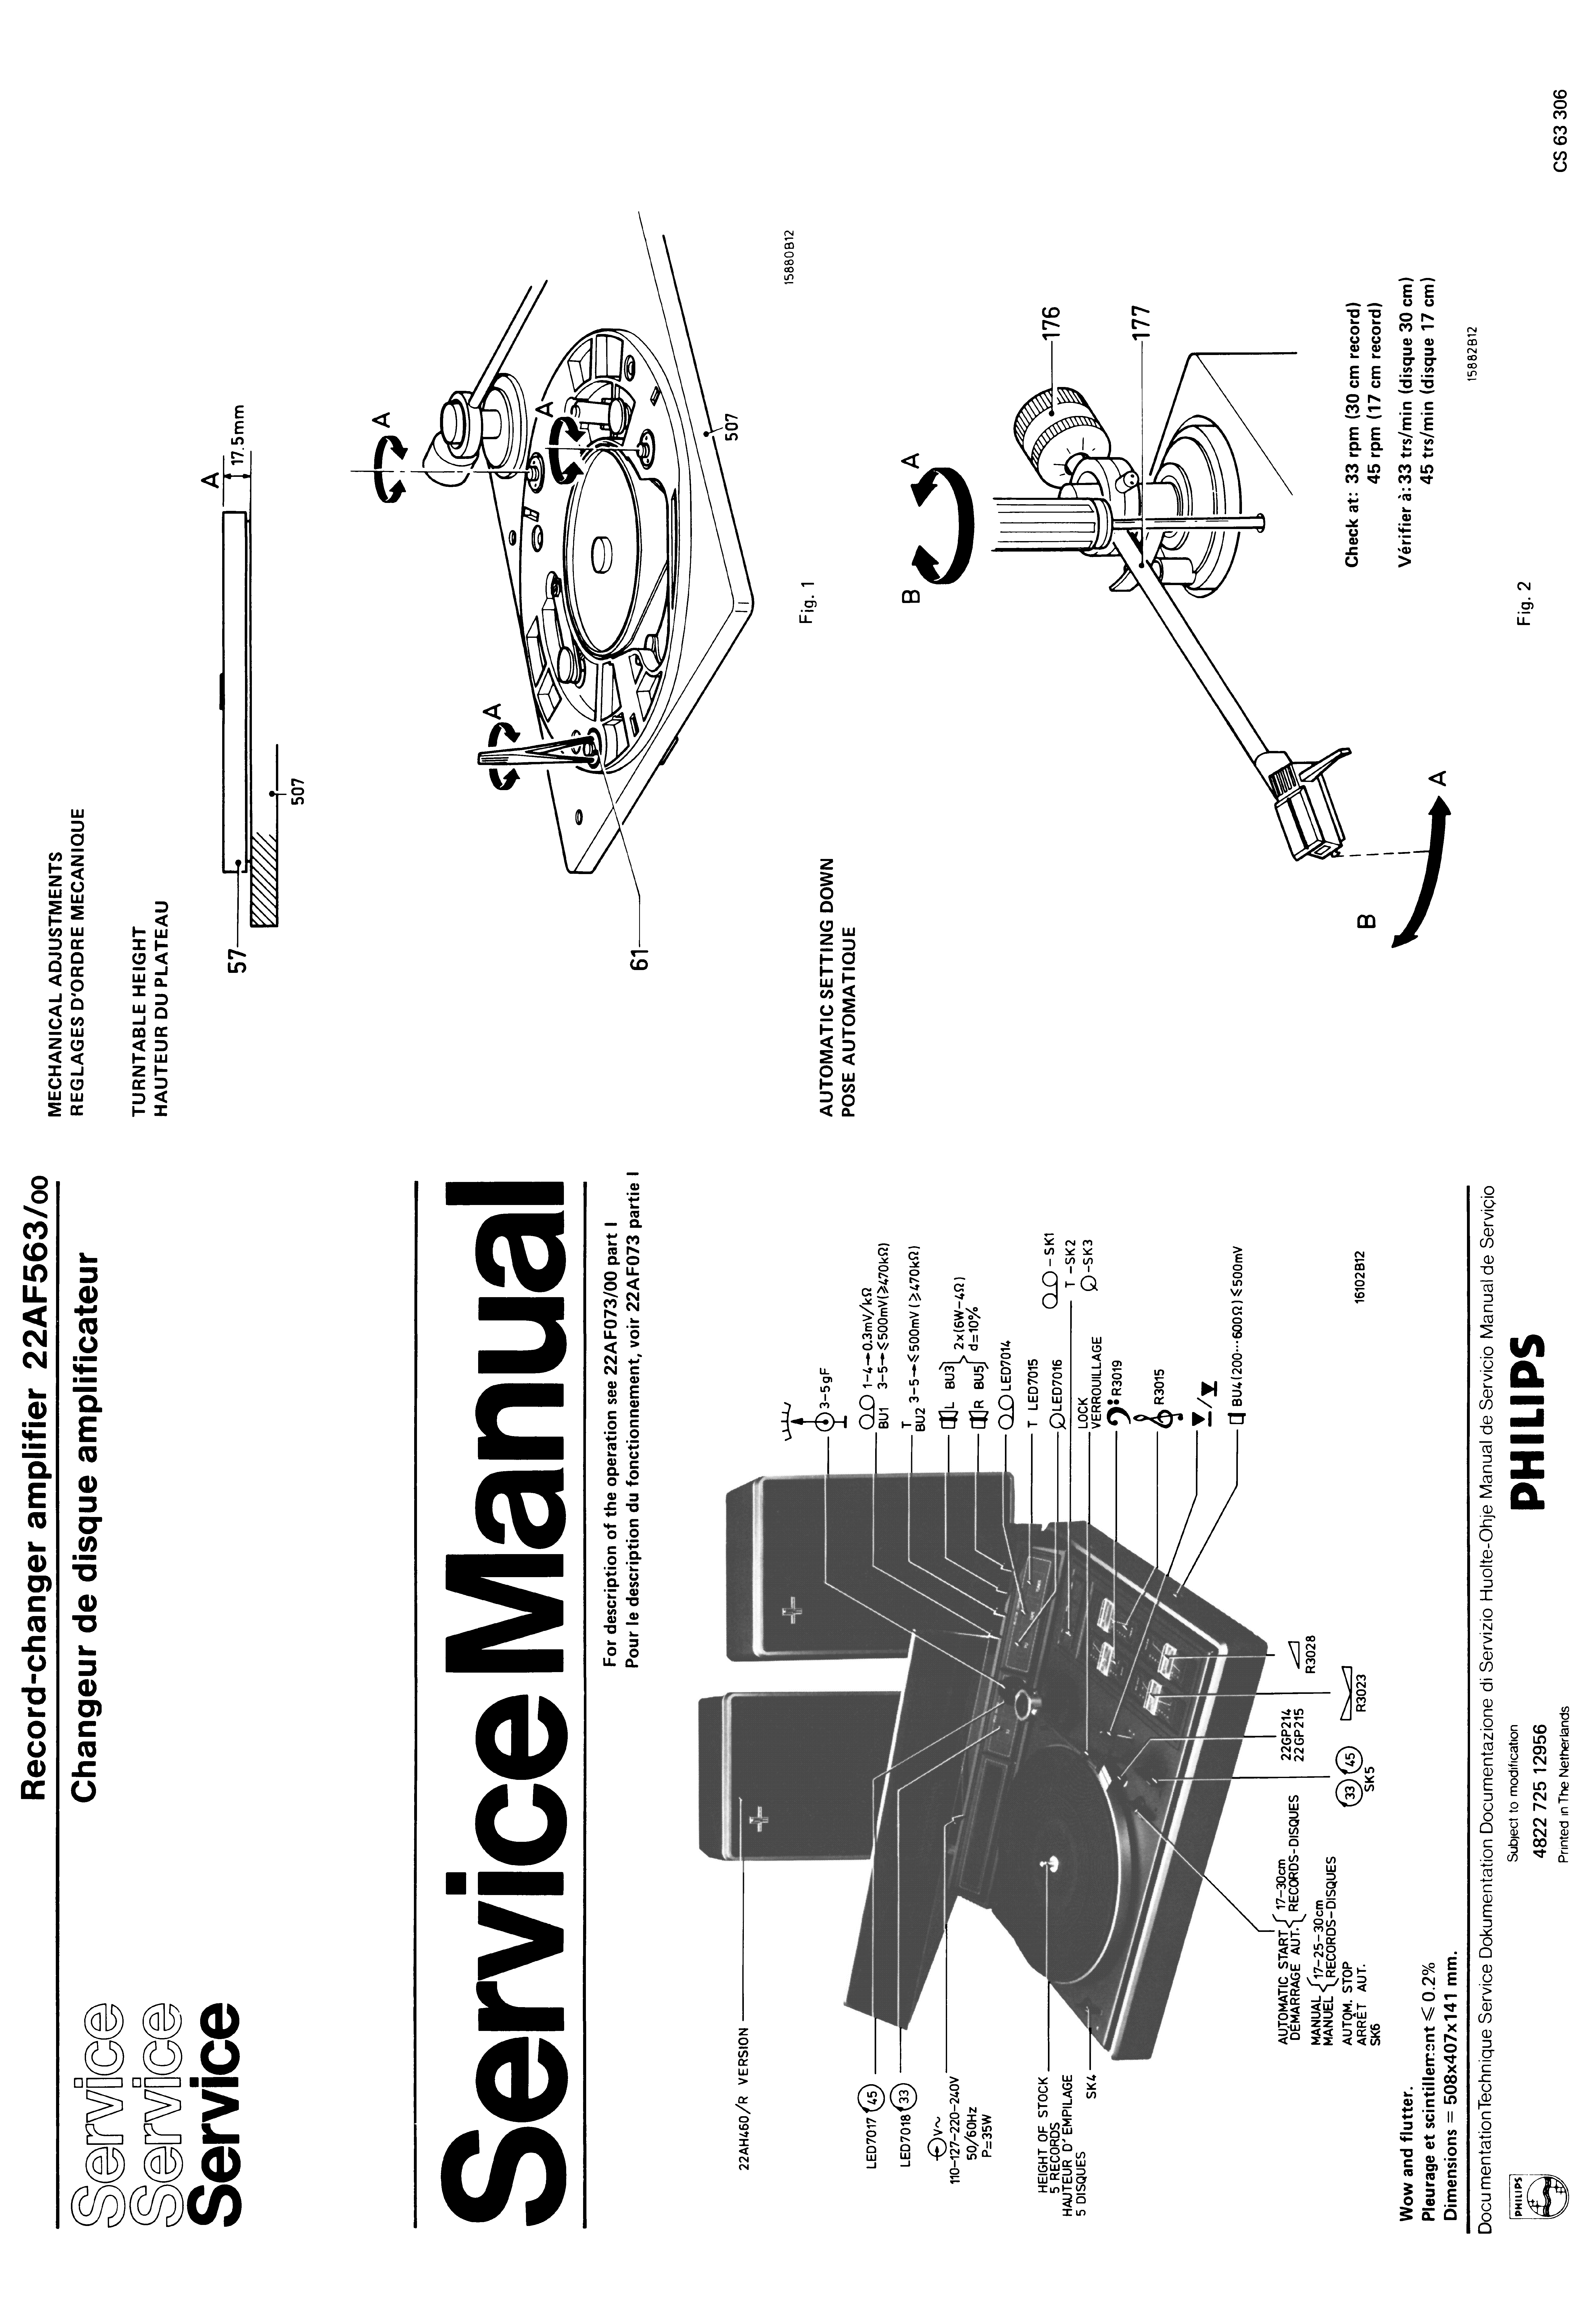 PHILIPS 22AF563 RECORD-CHANGER AMPLIFIER SM service manual (1st page)